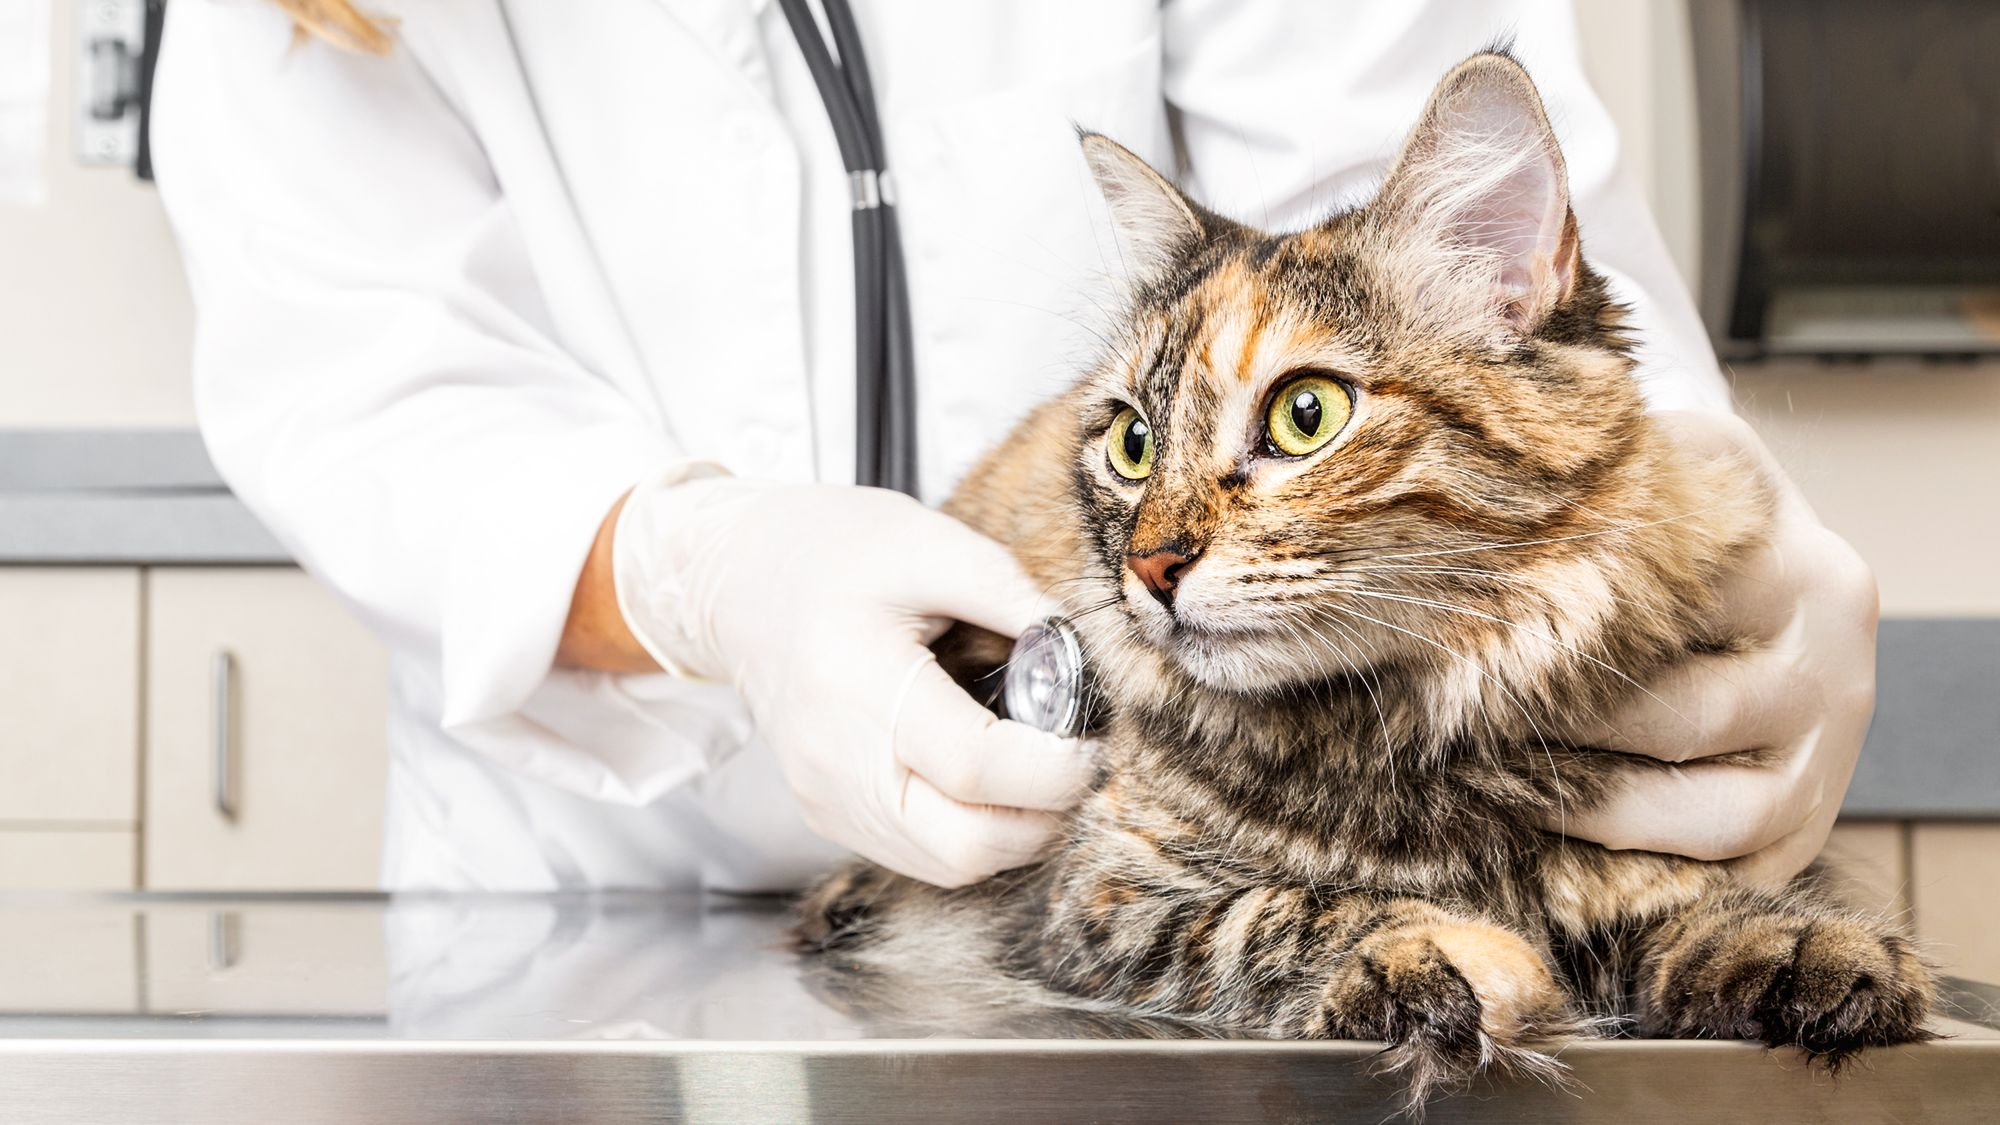 Vet carrying out assessment on cat